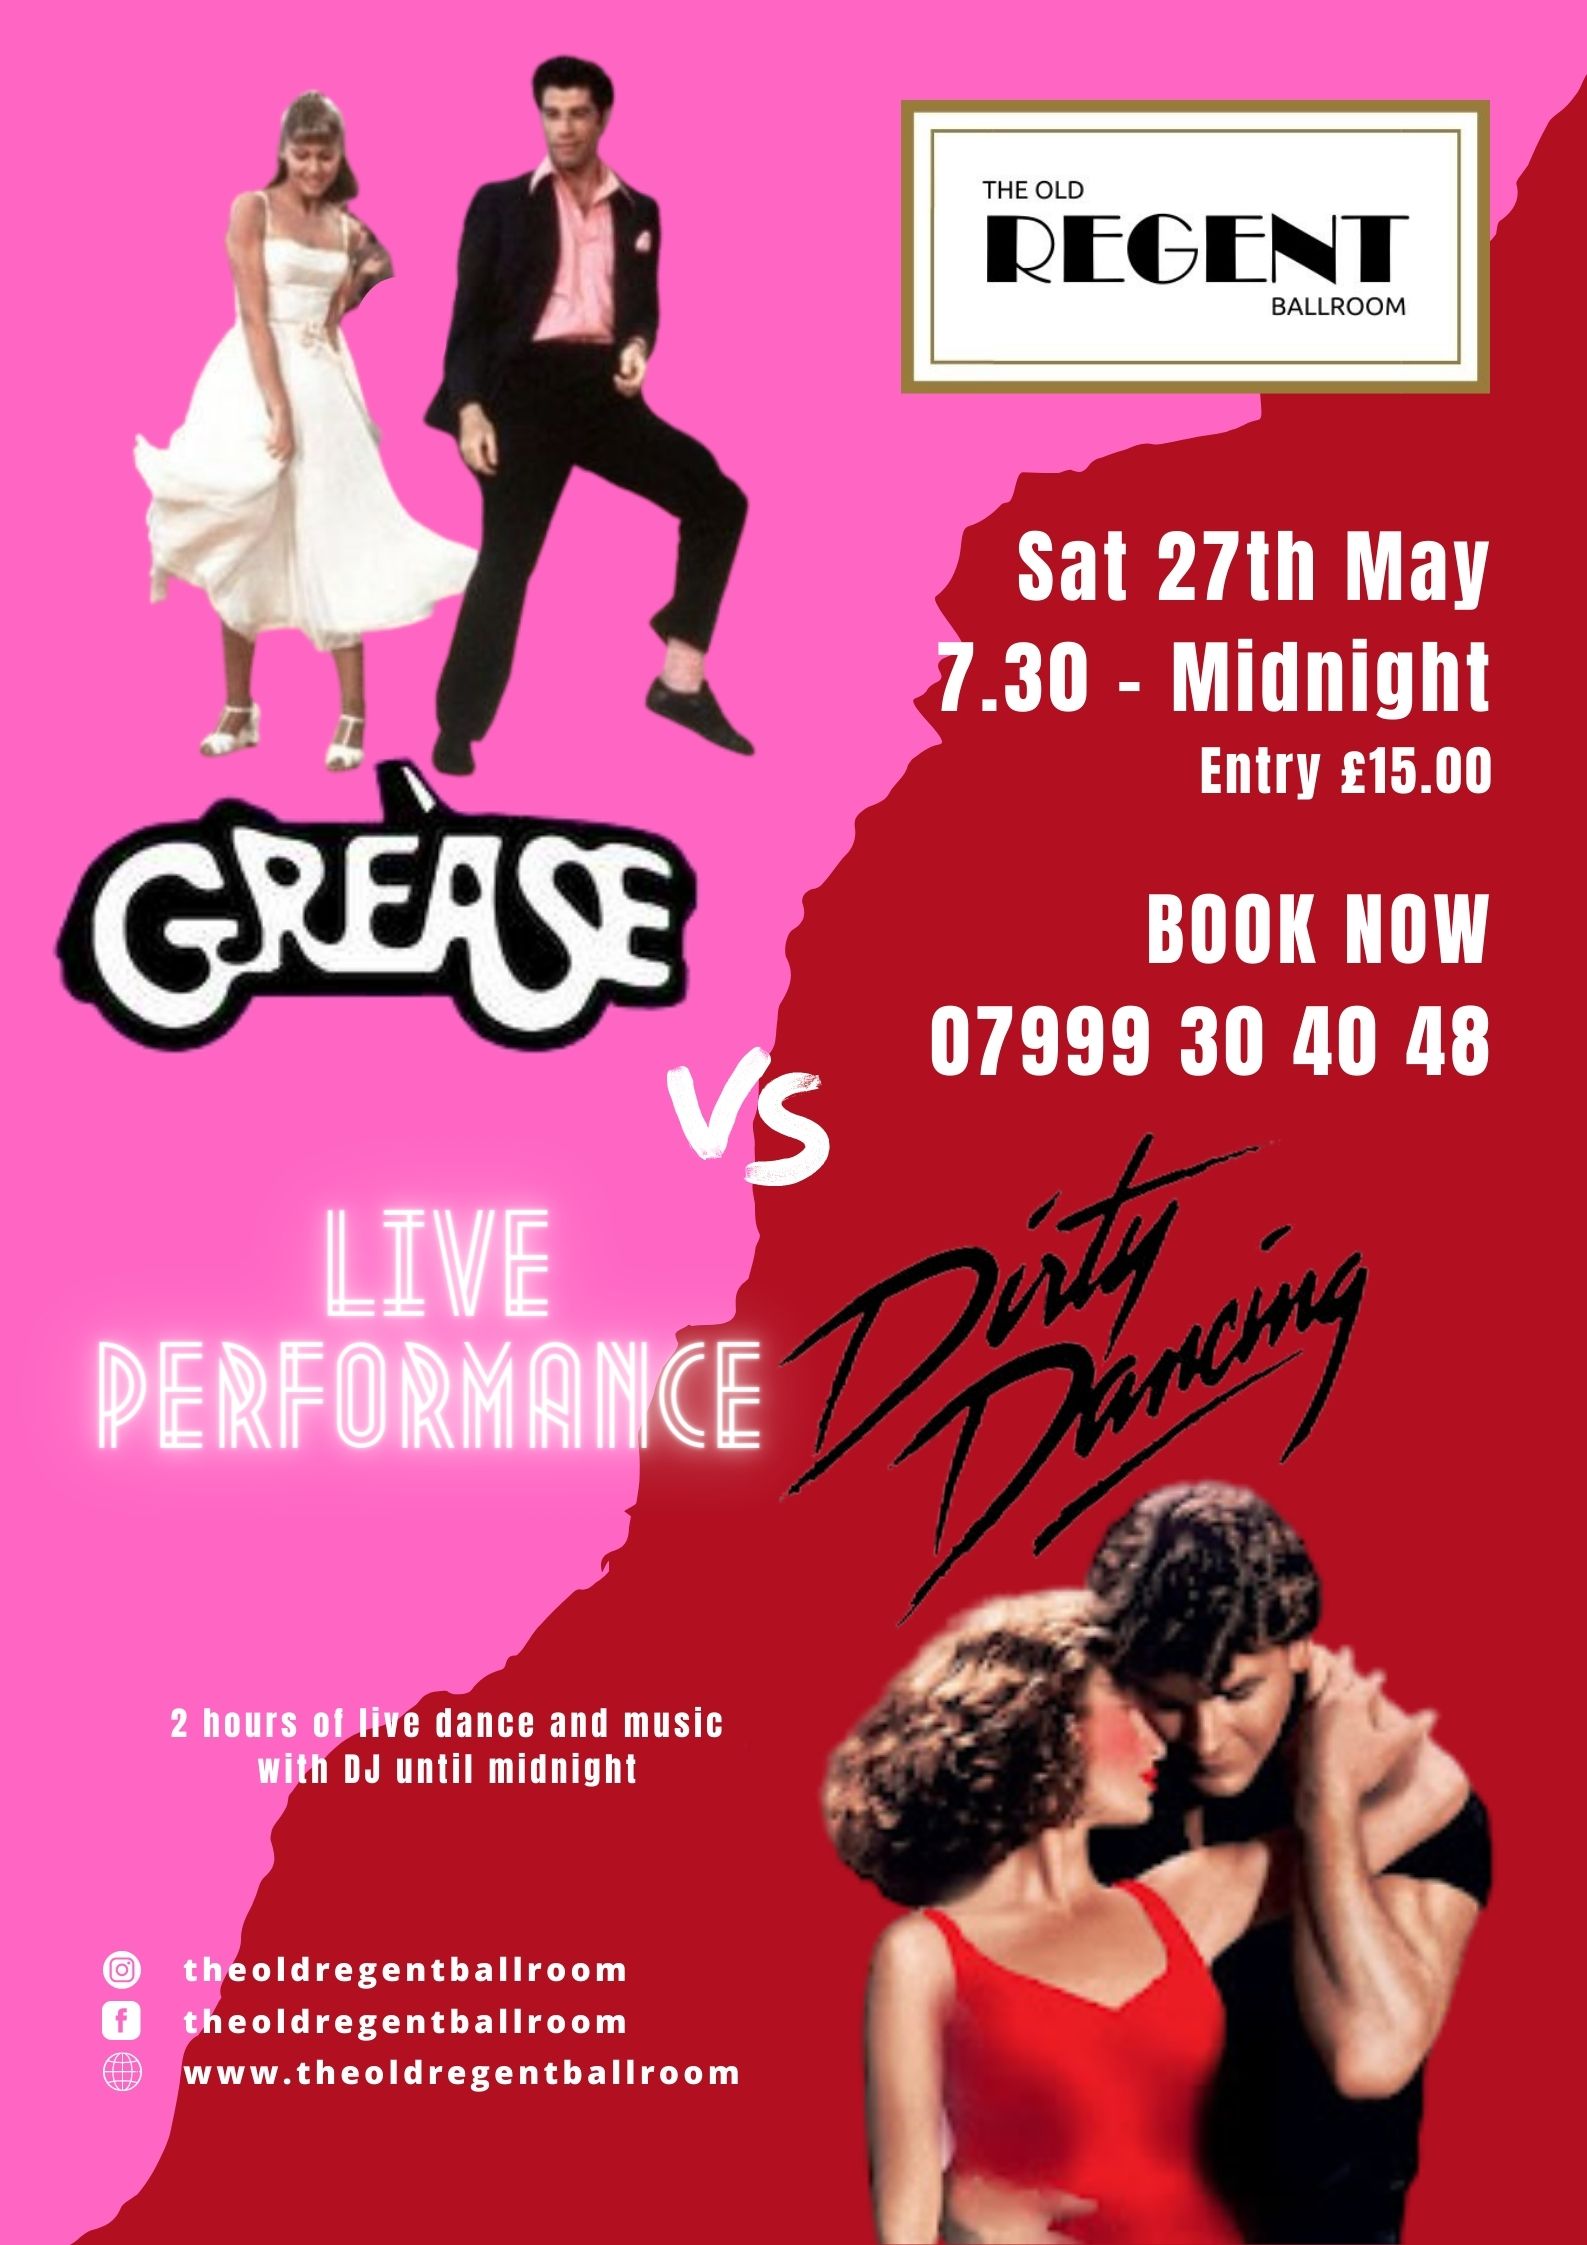 Dirty Dancing vs Grease @ The Old Regent